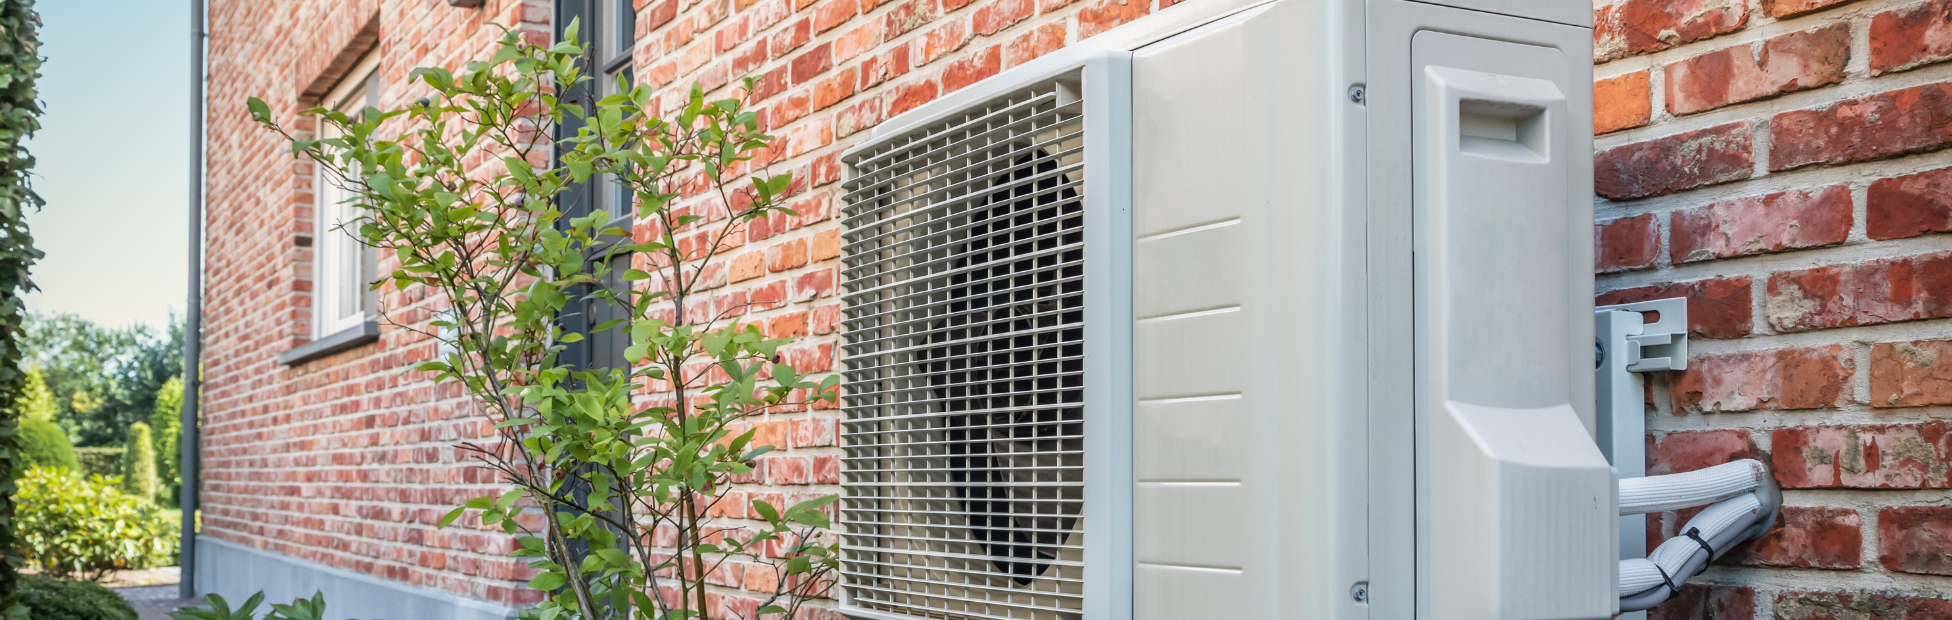 A heat pump can save you money on your energy bills and reduce your impact on the environment